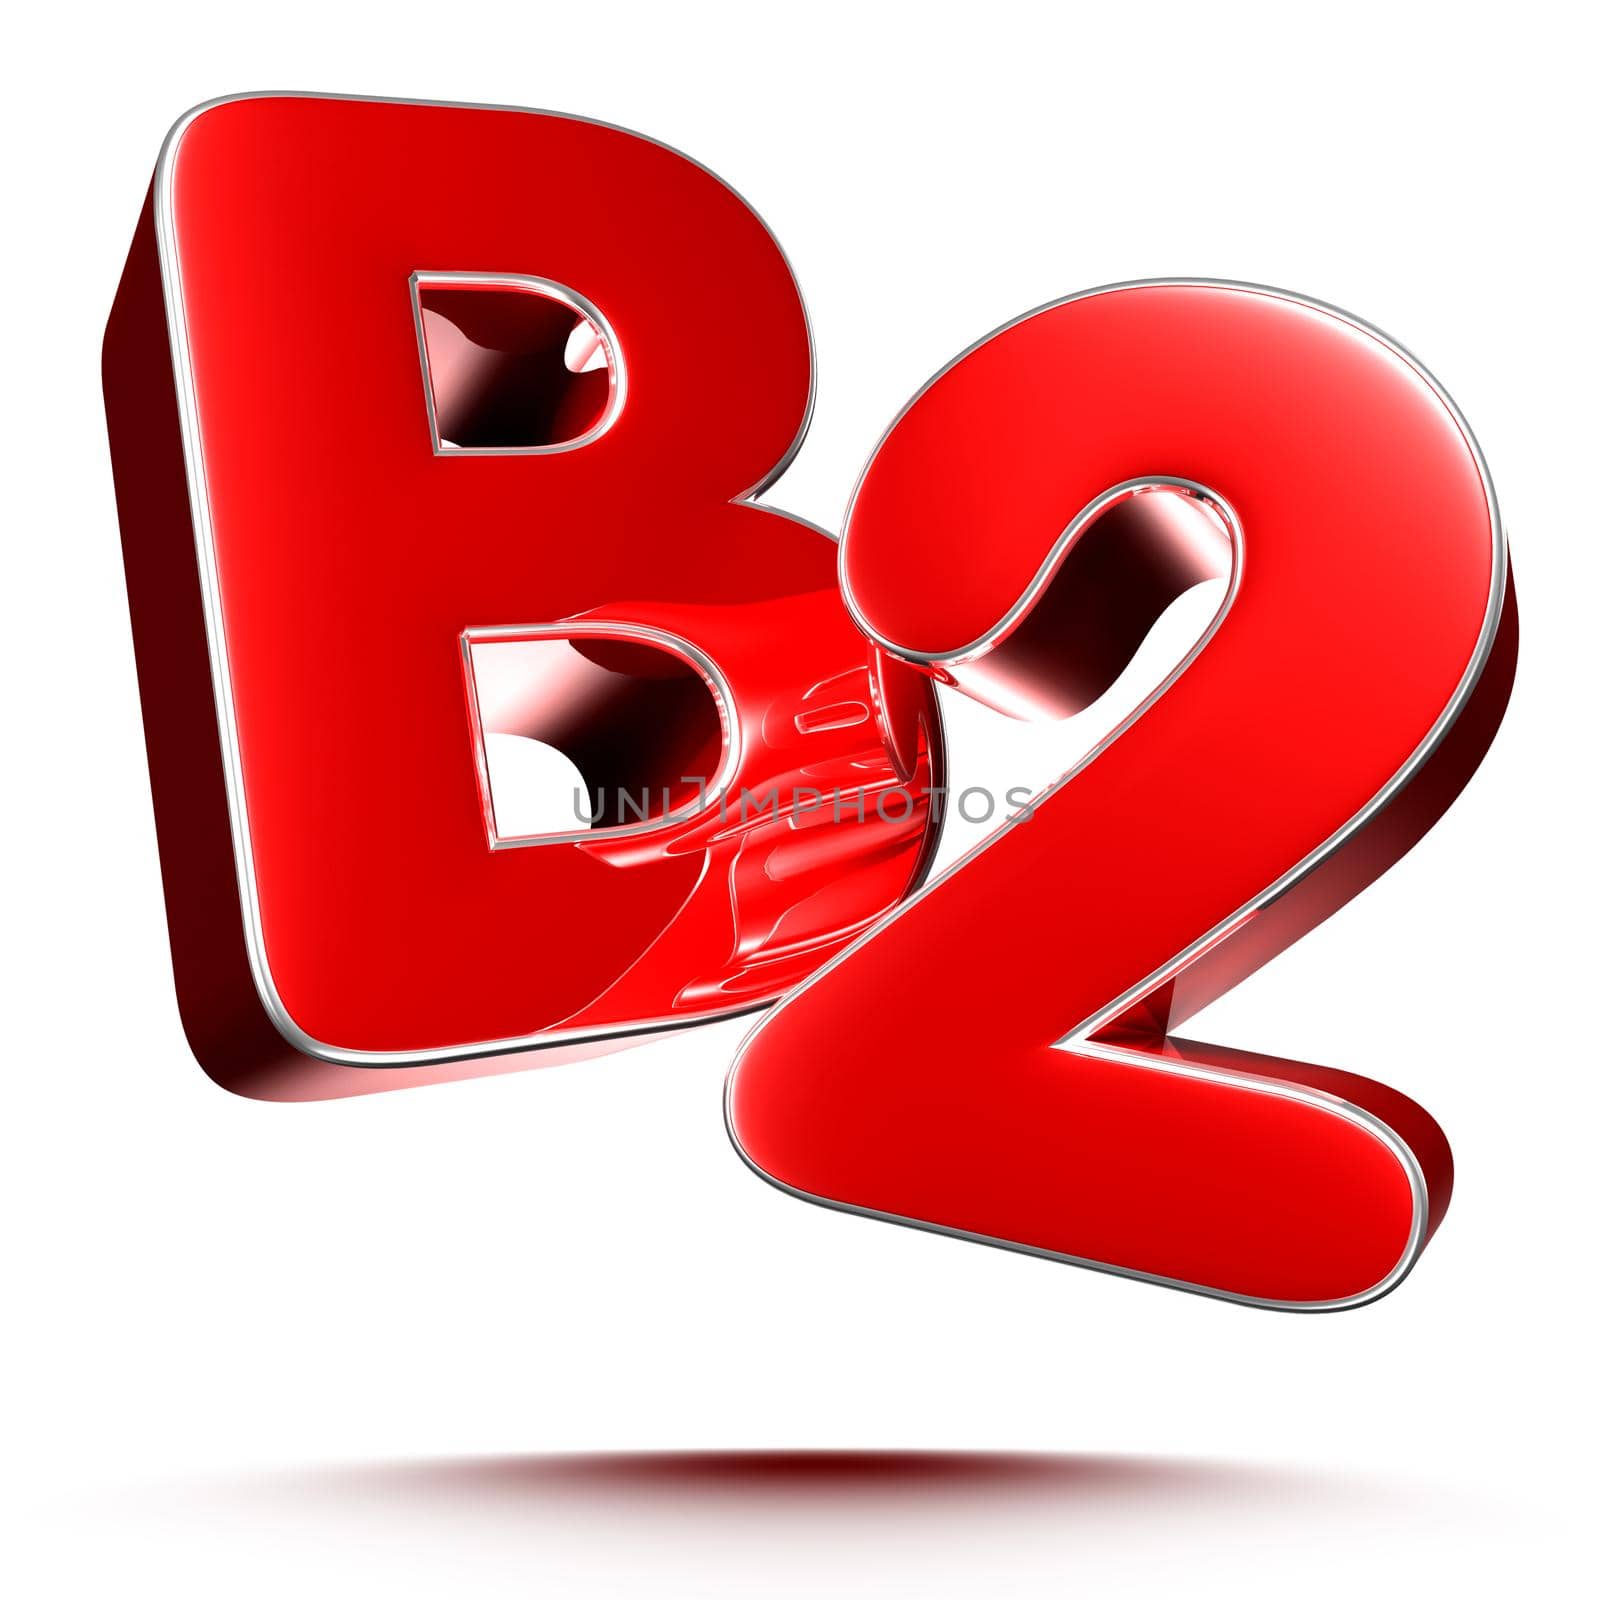 B2 red 3D illustration on white background with clipping path. by thitimontoyai